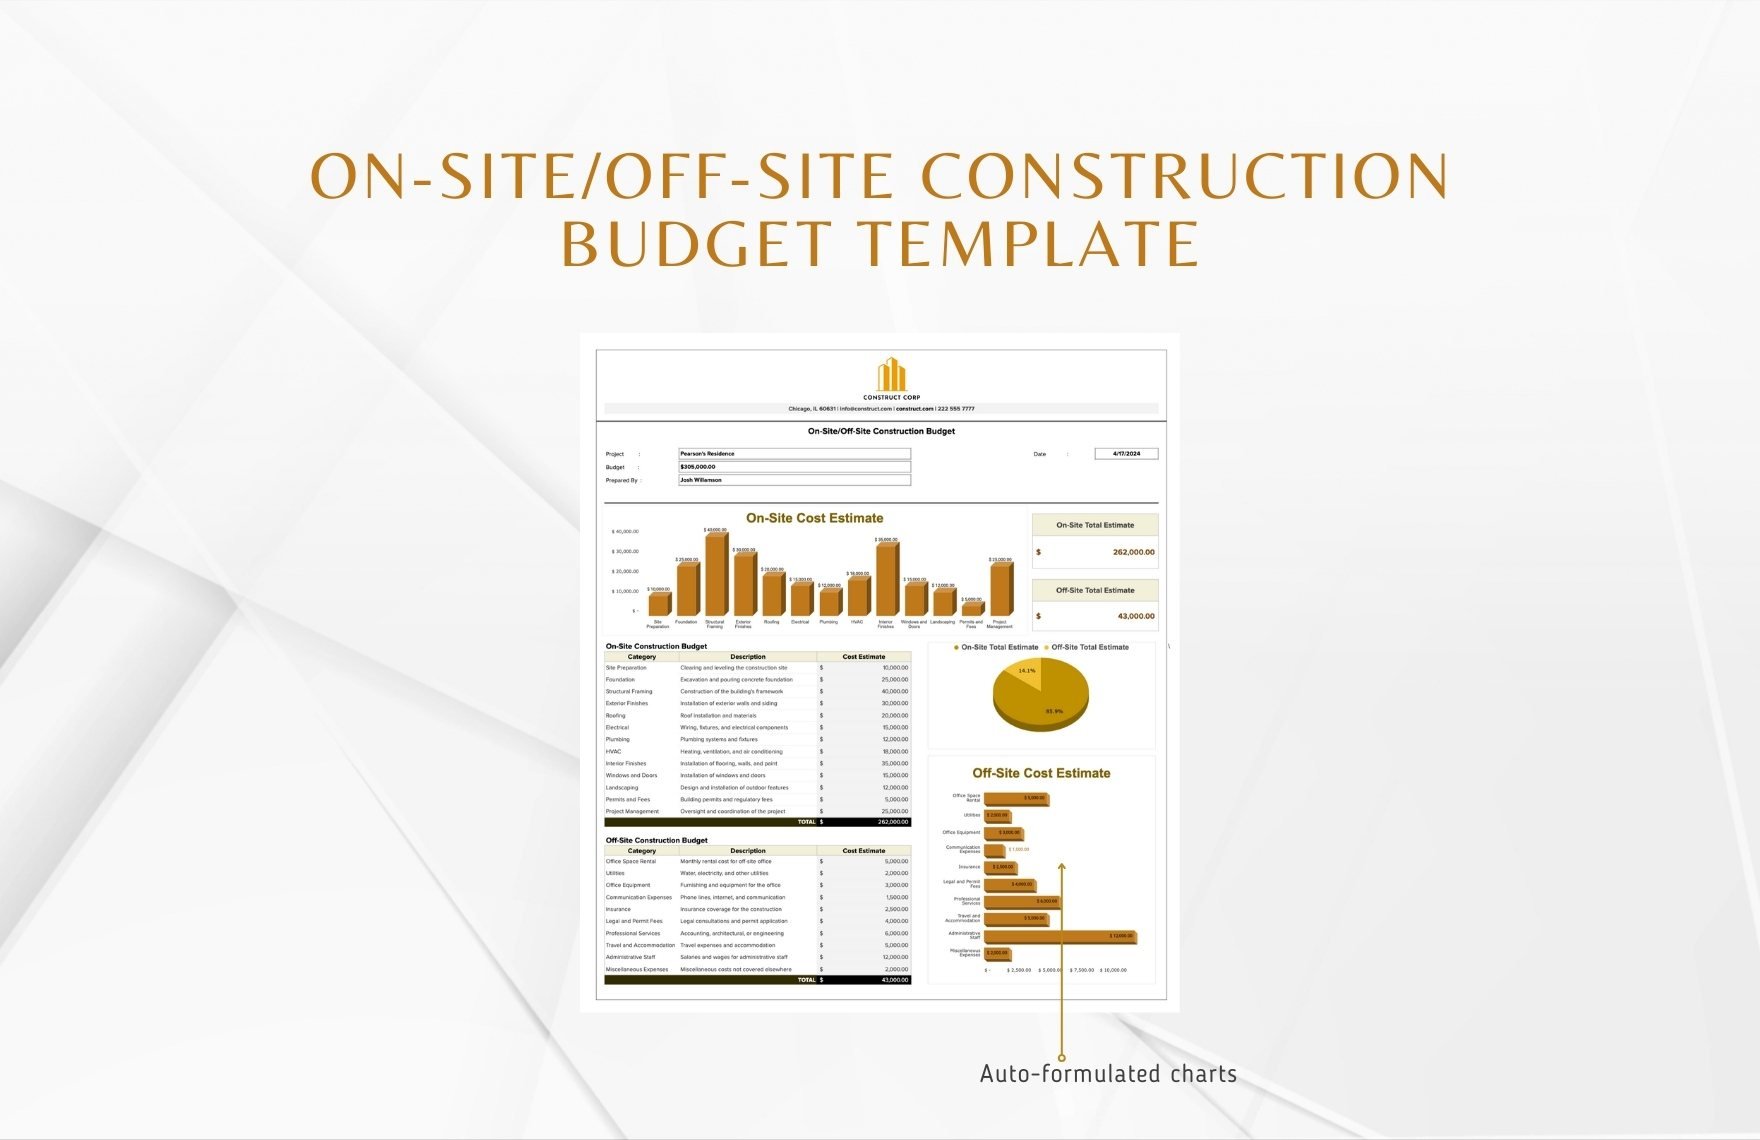 On-Site/Off-Site Construction Budget Template